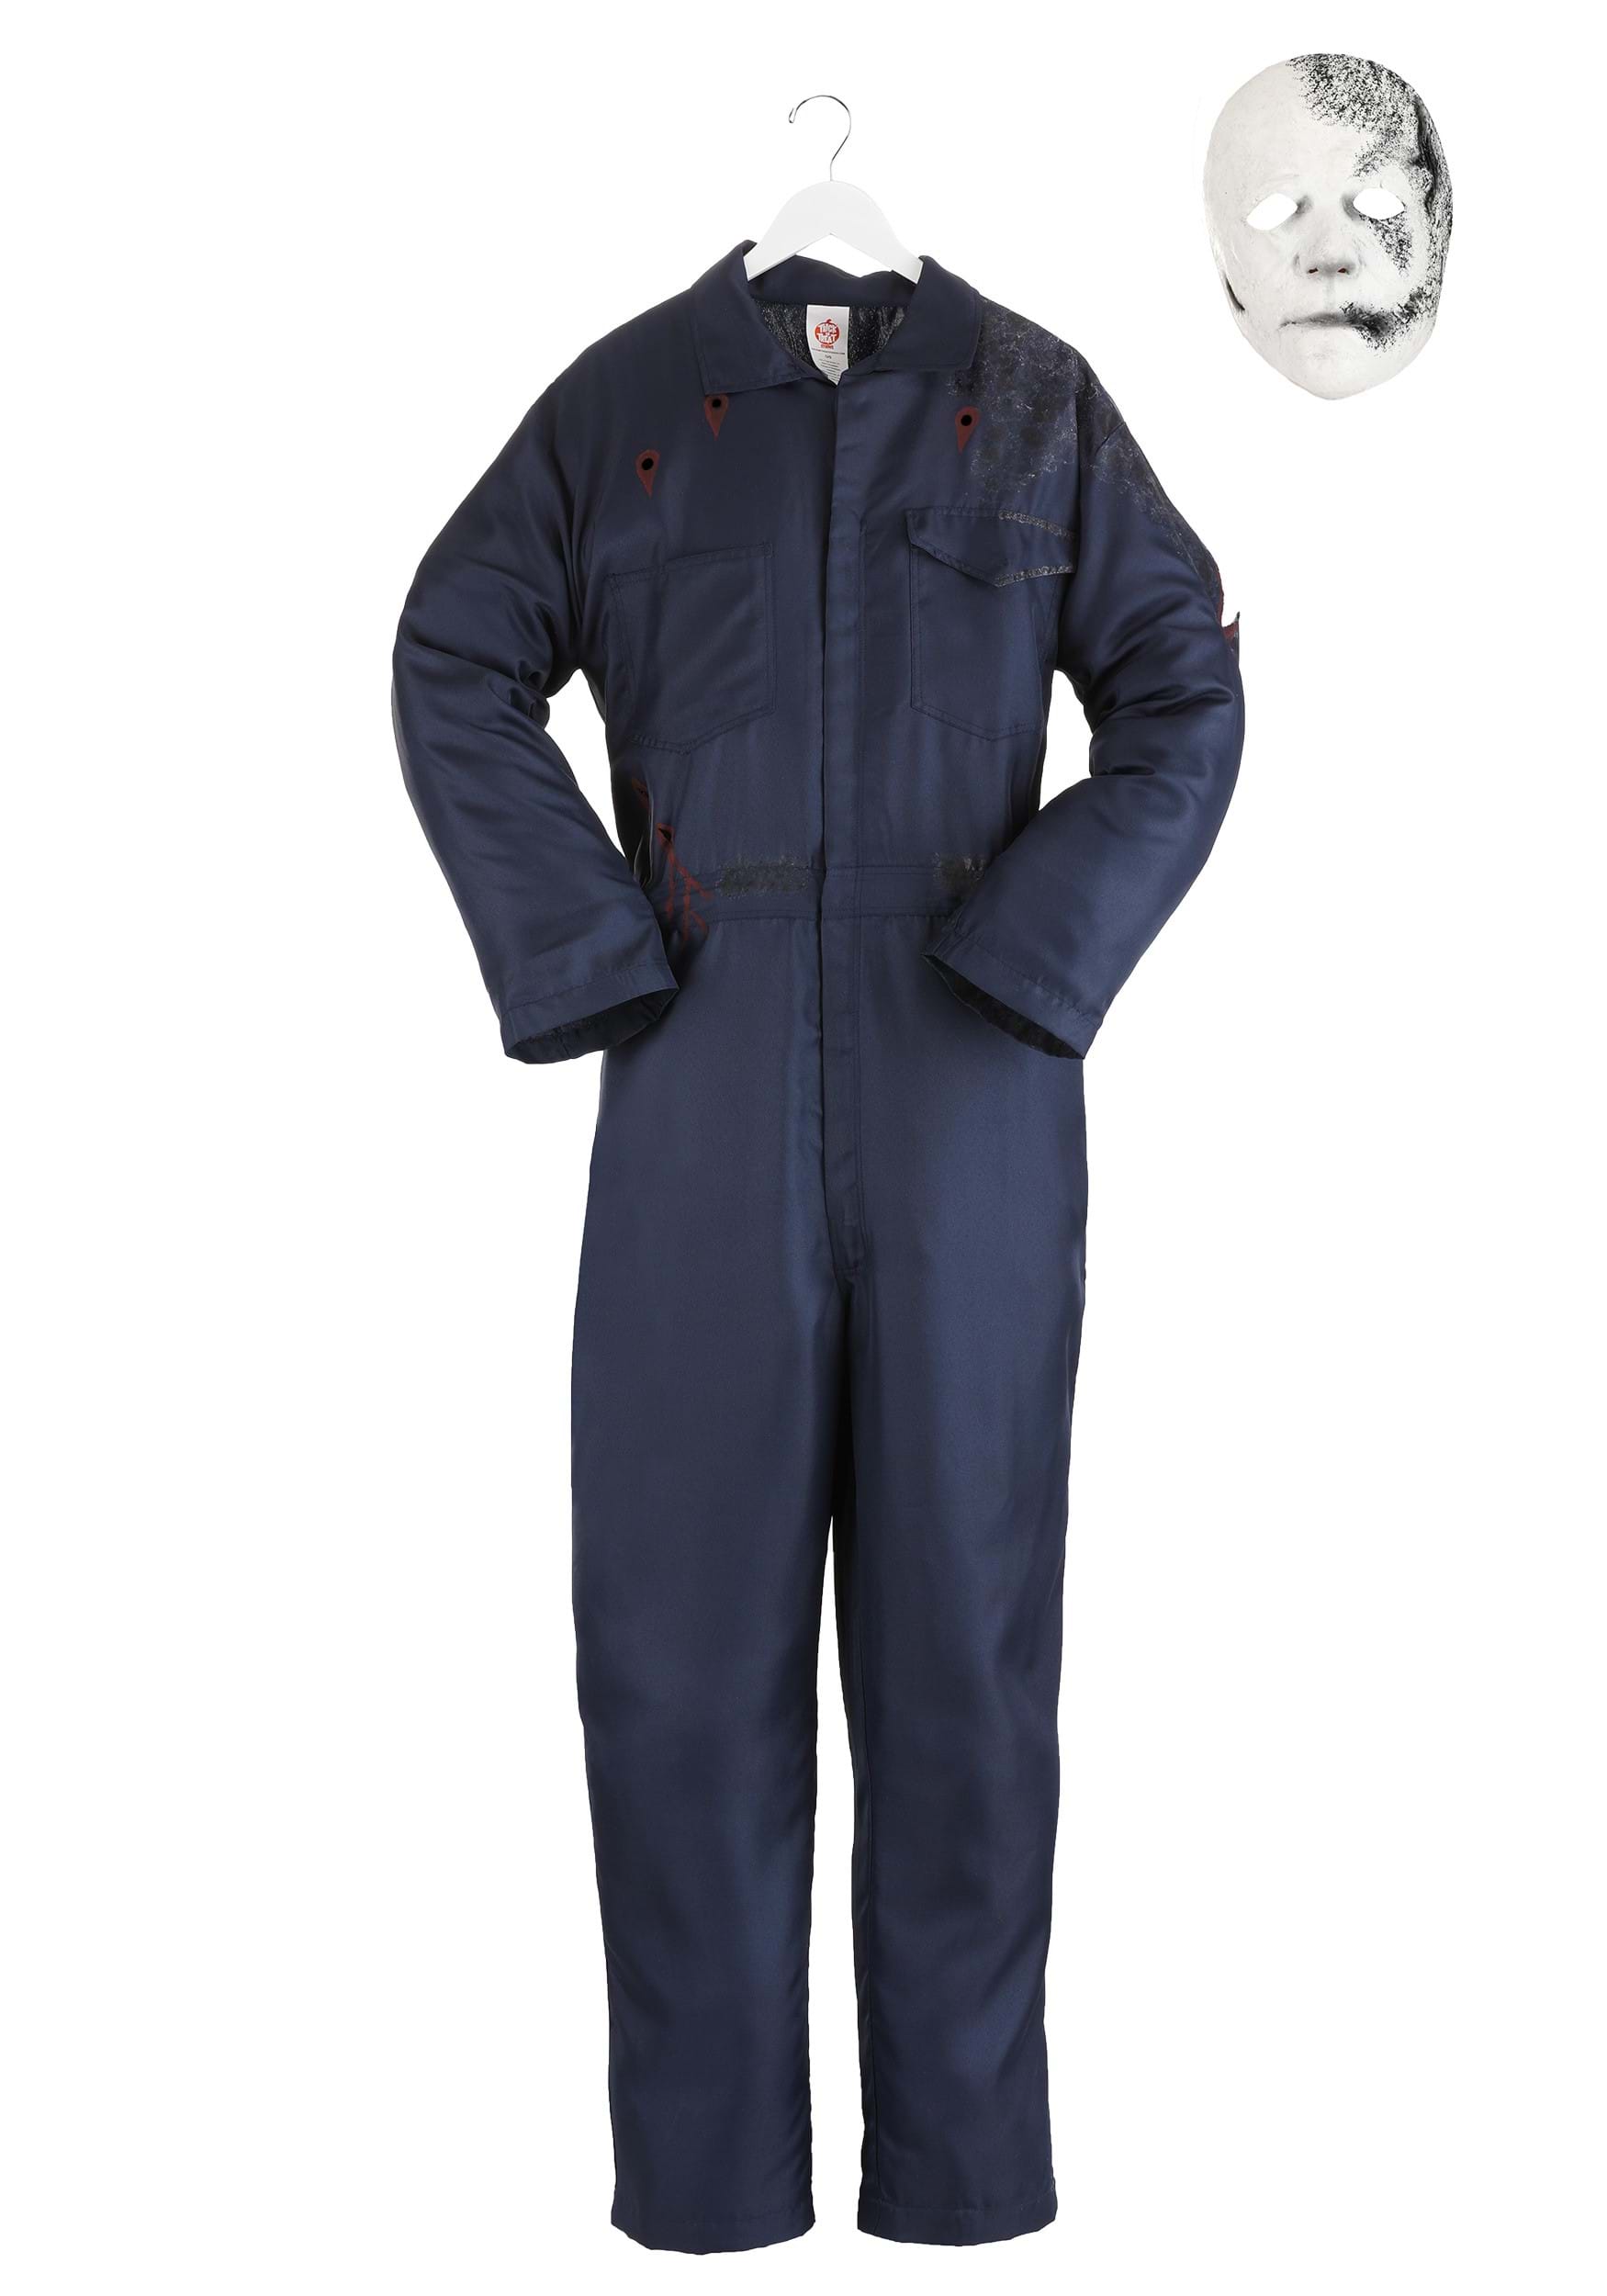 Adult Halloween Kills Coveralls with Mask Combo